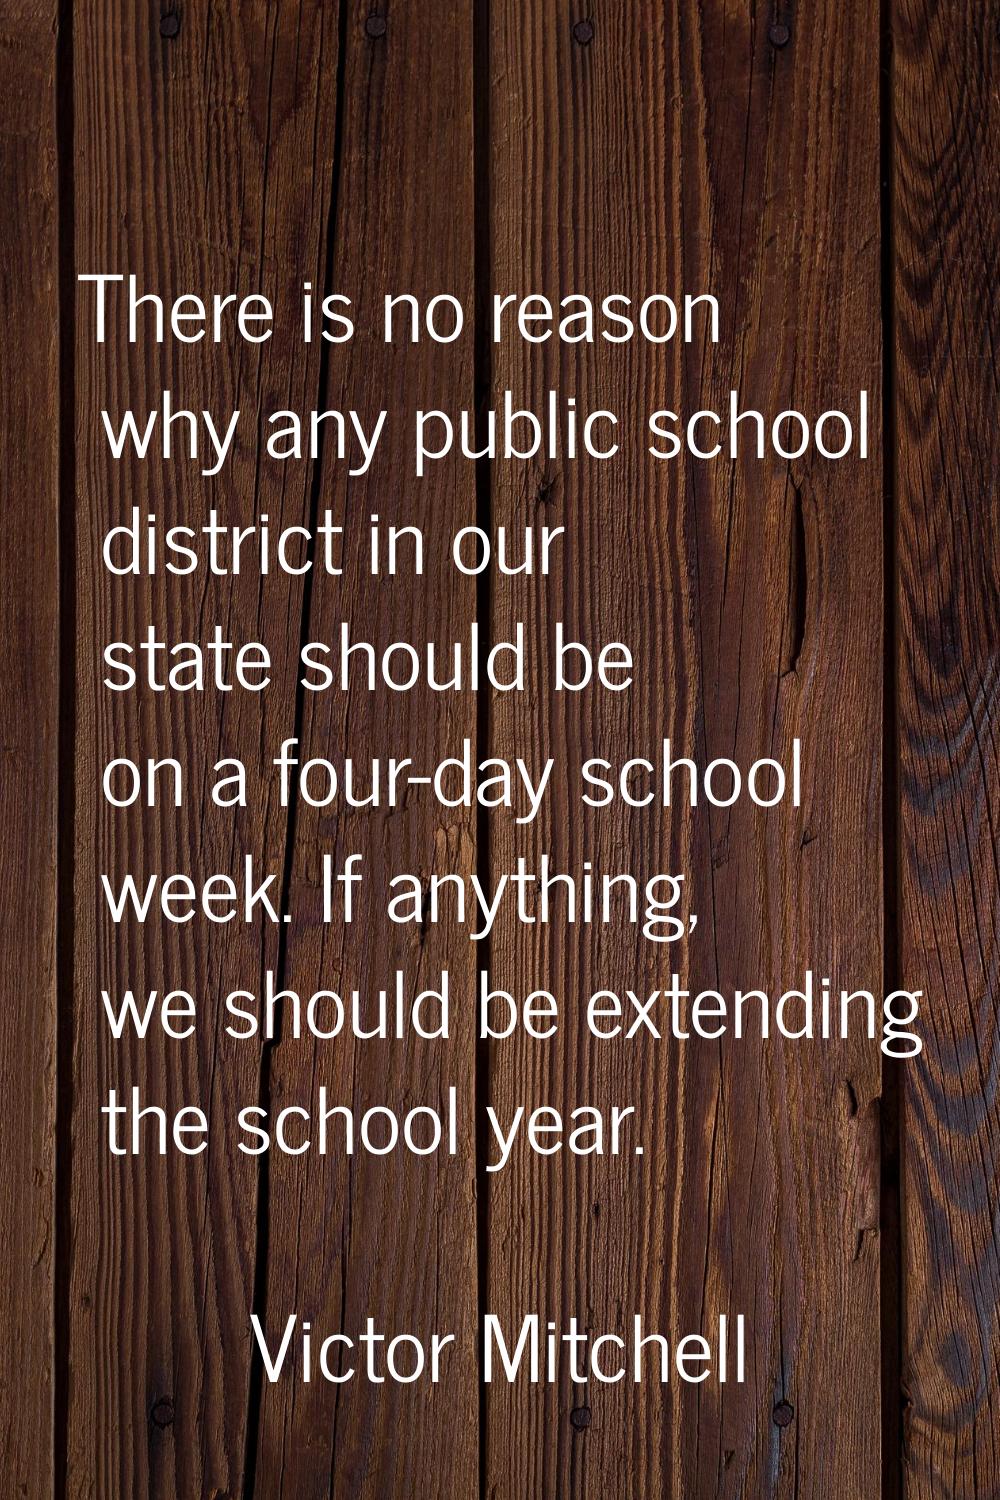 There is no reason why any public school district in our state should be on a four-day school week.